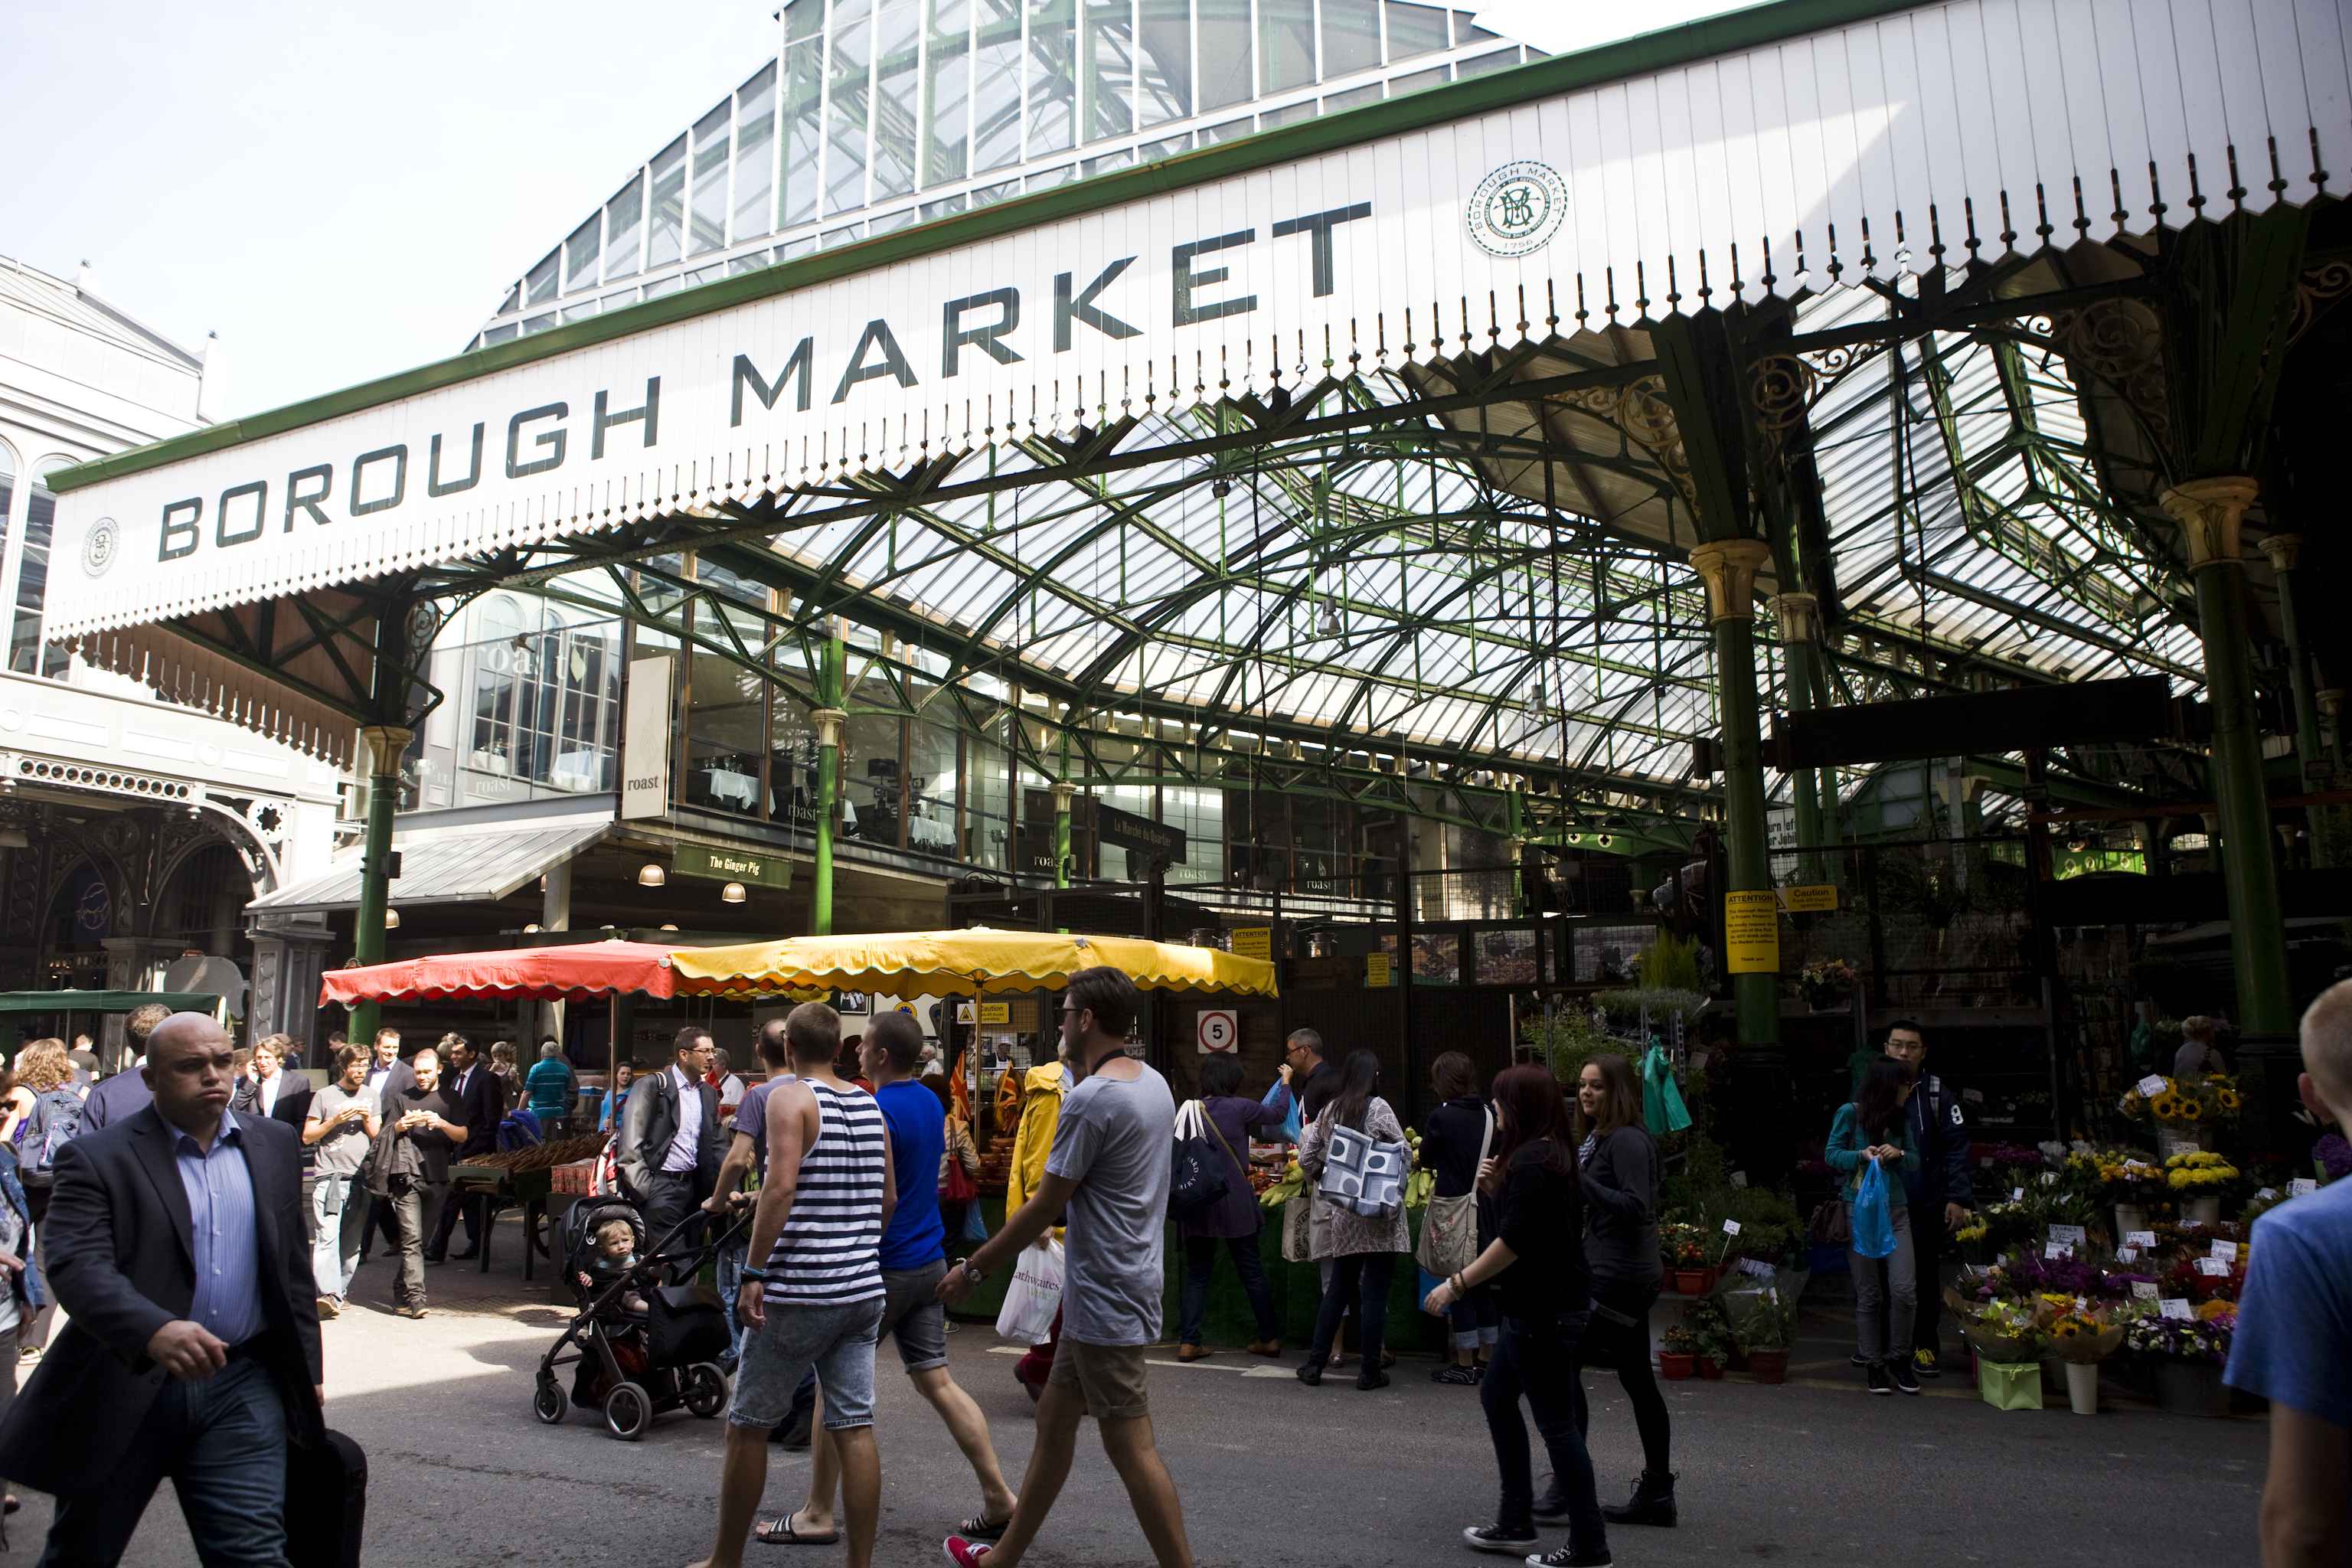 Borough Market - one of the best markets in London